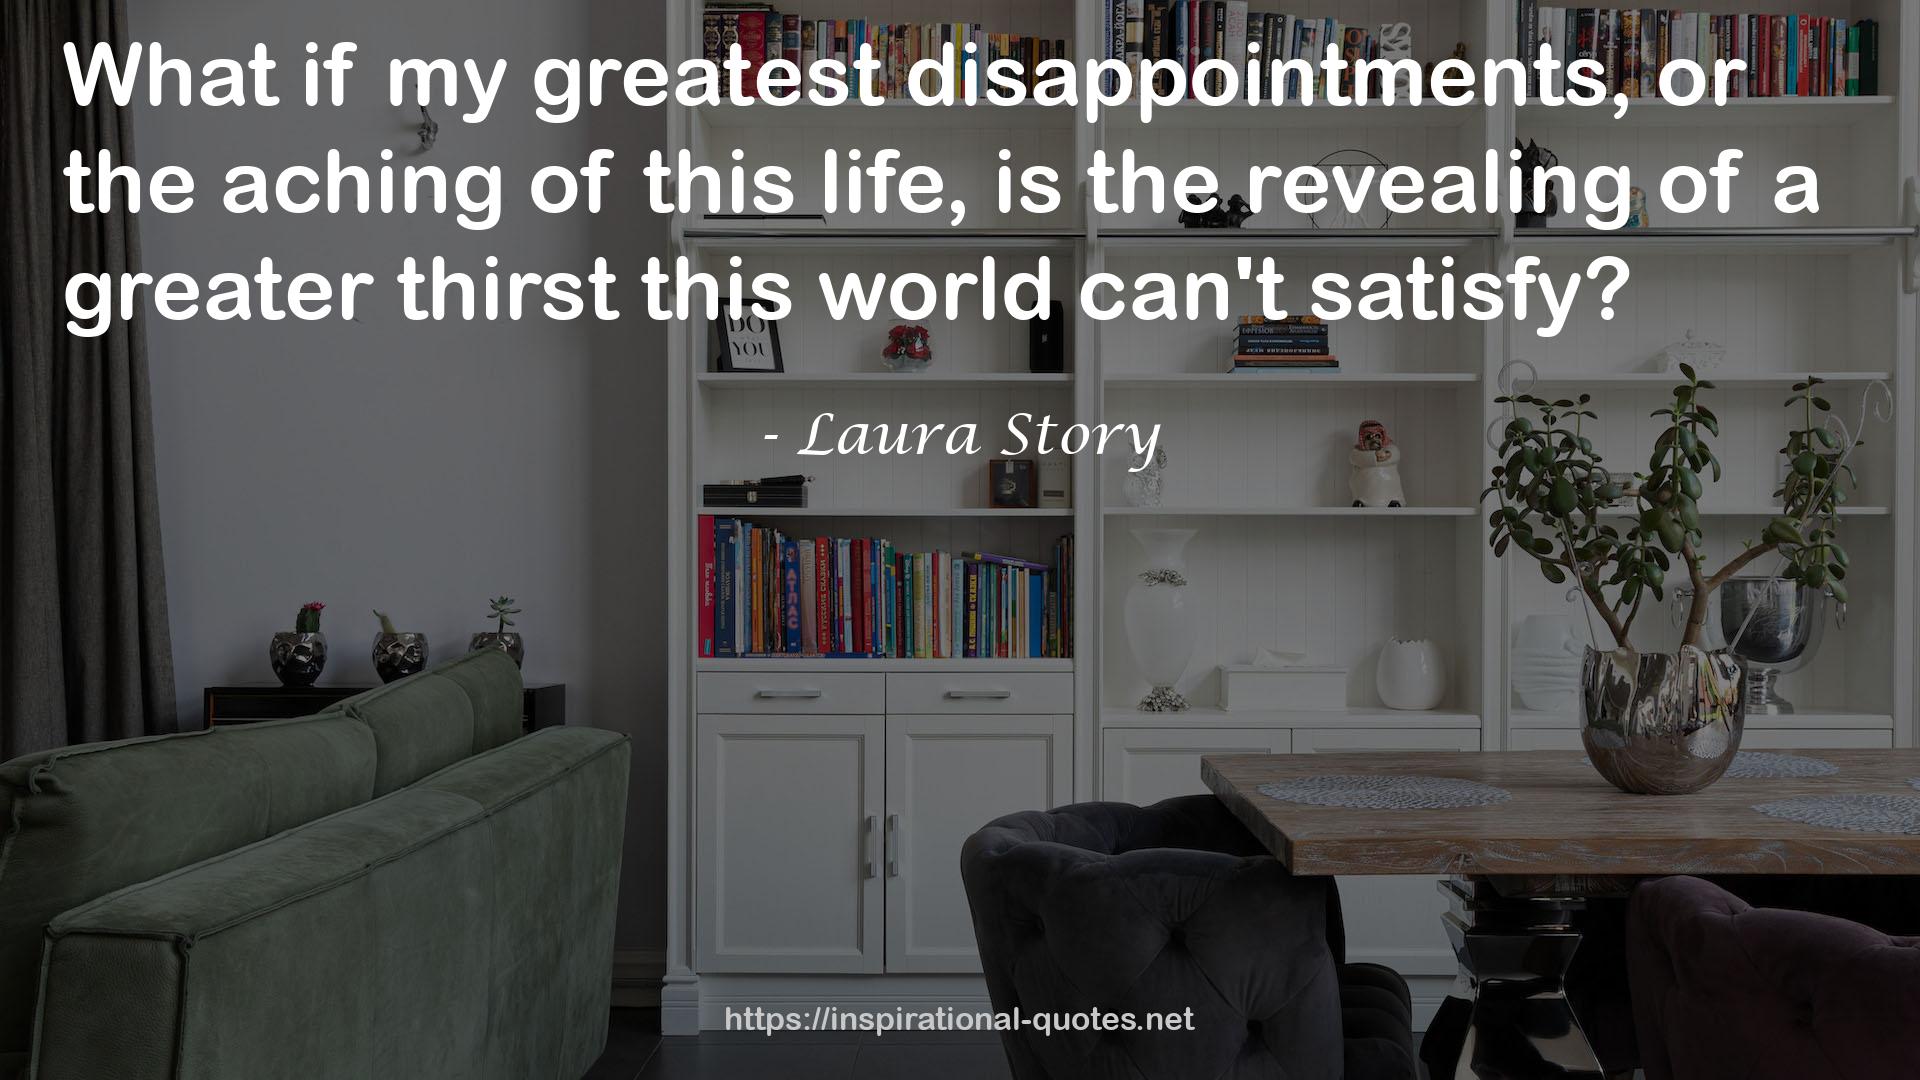 Laura Story QUOTES